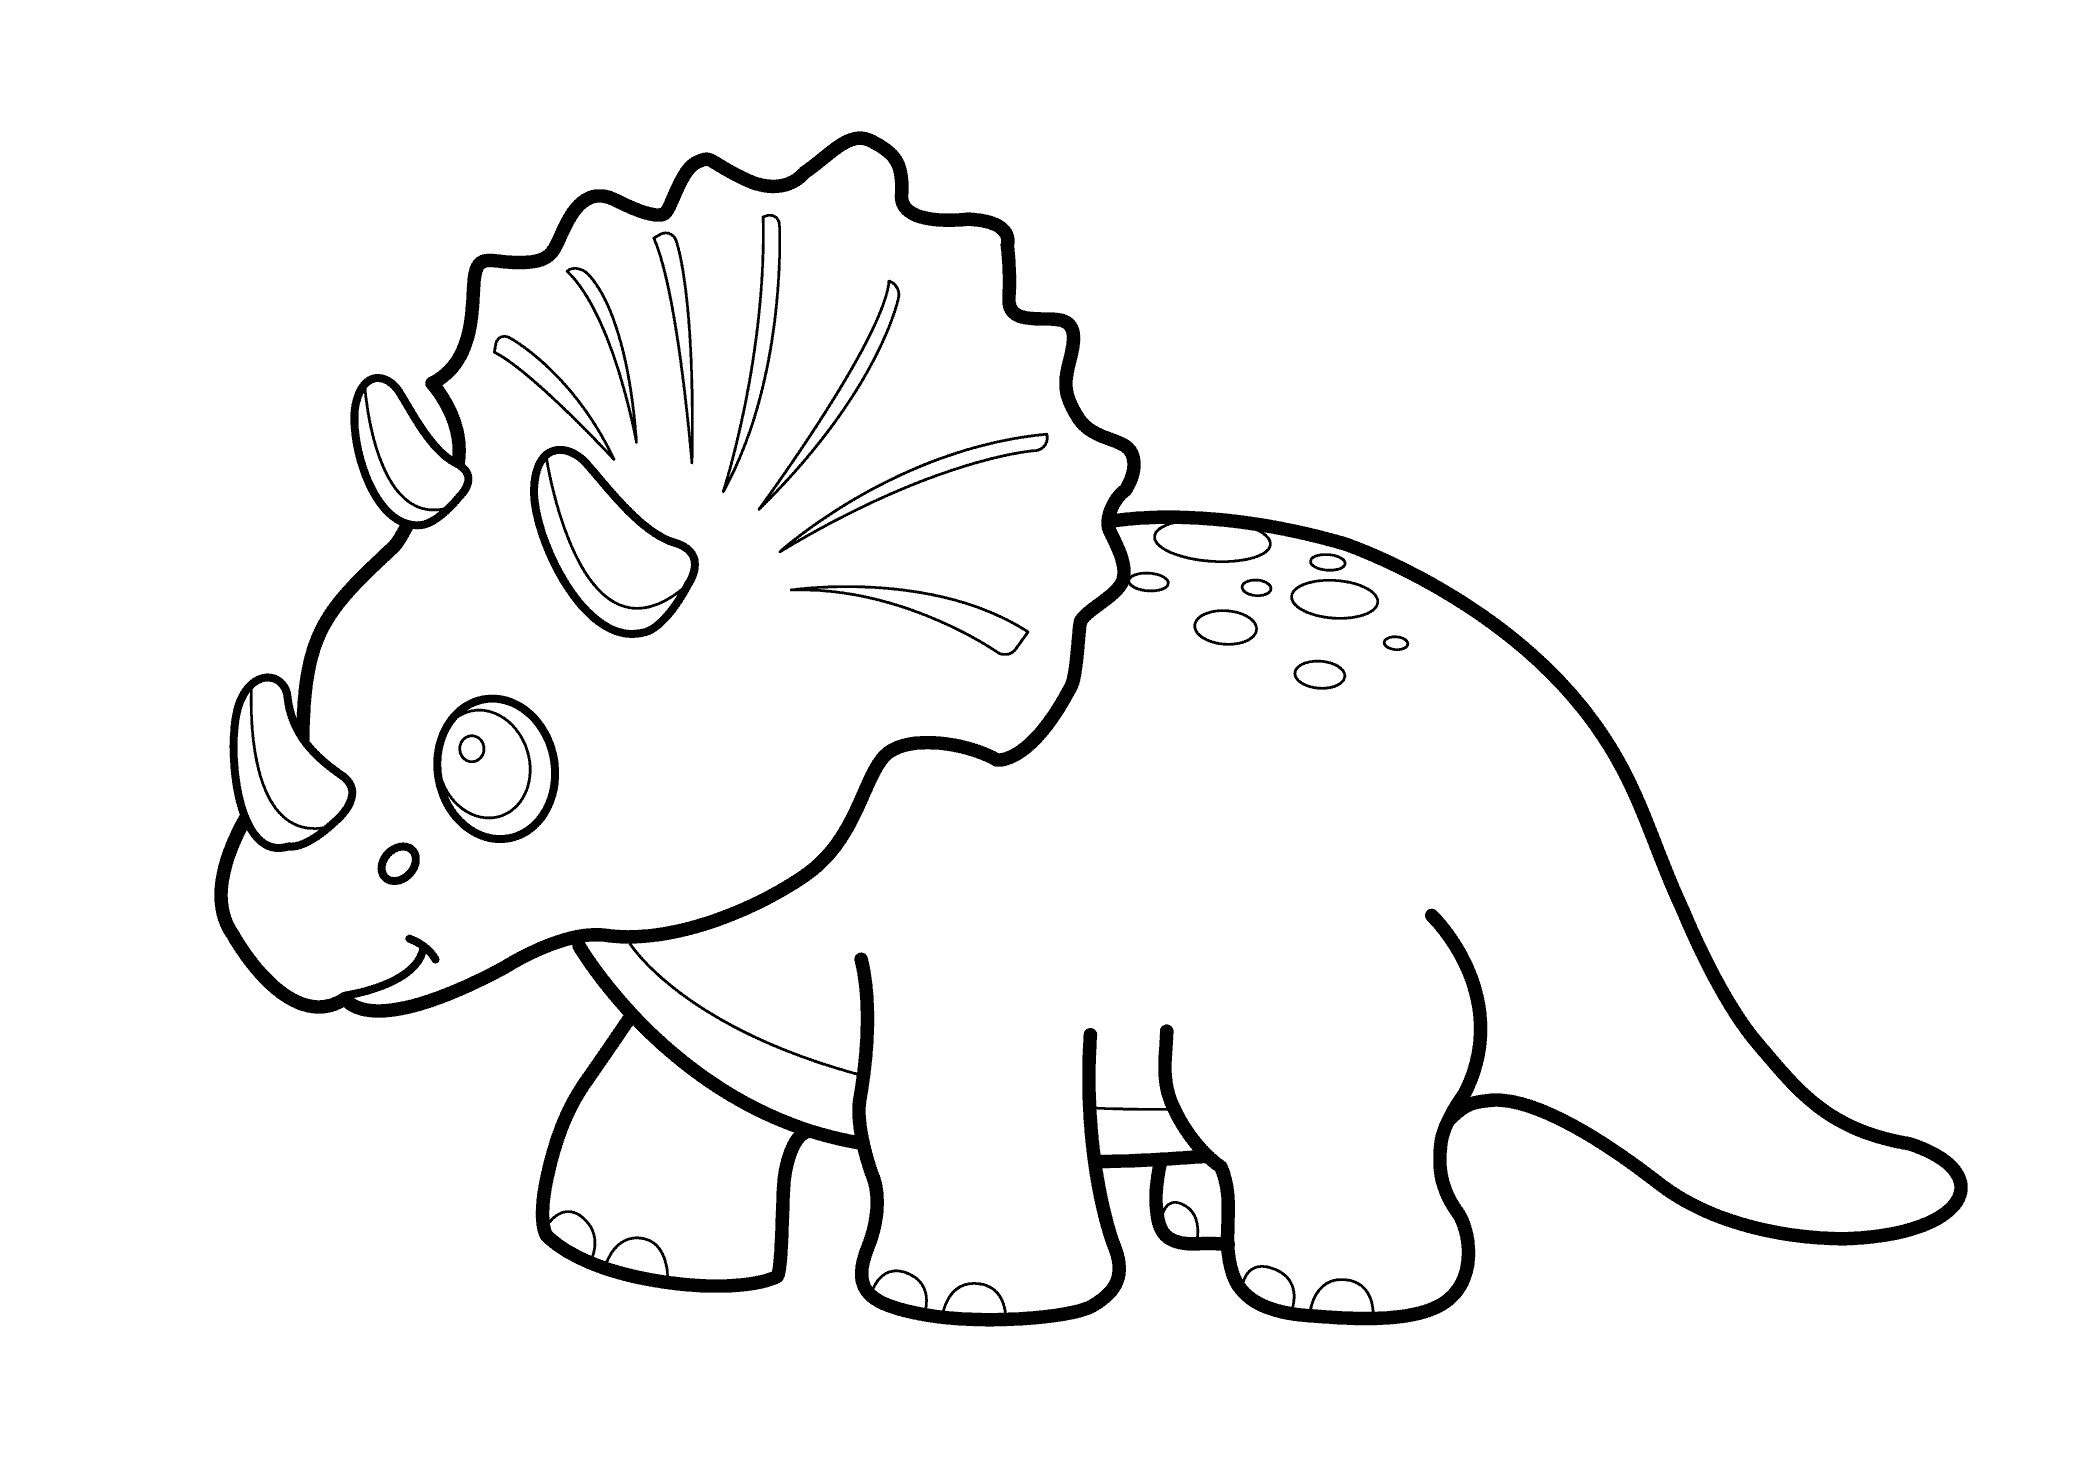 Coloring Pages For Kids Dinosaurs
 Funny dinosaur triceratops cartoon coloring pages for kids